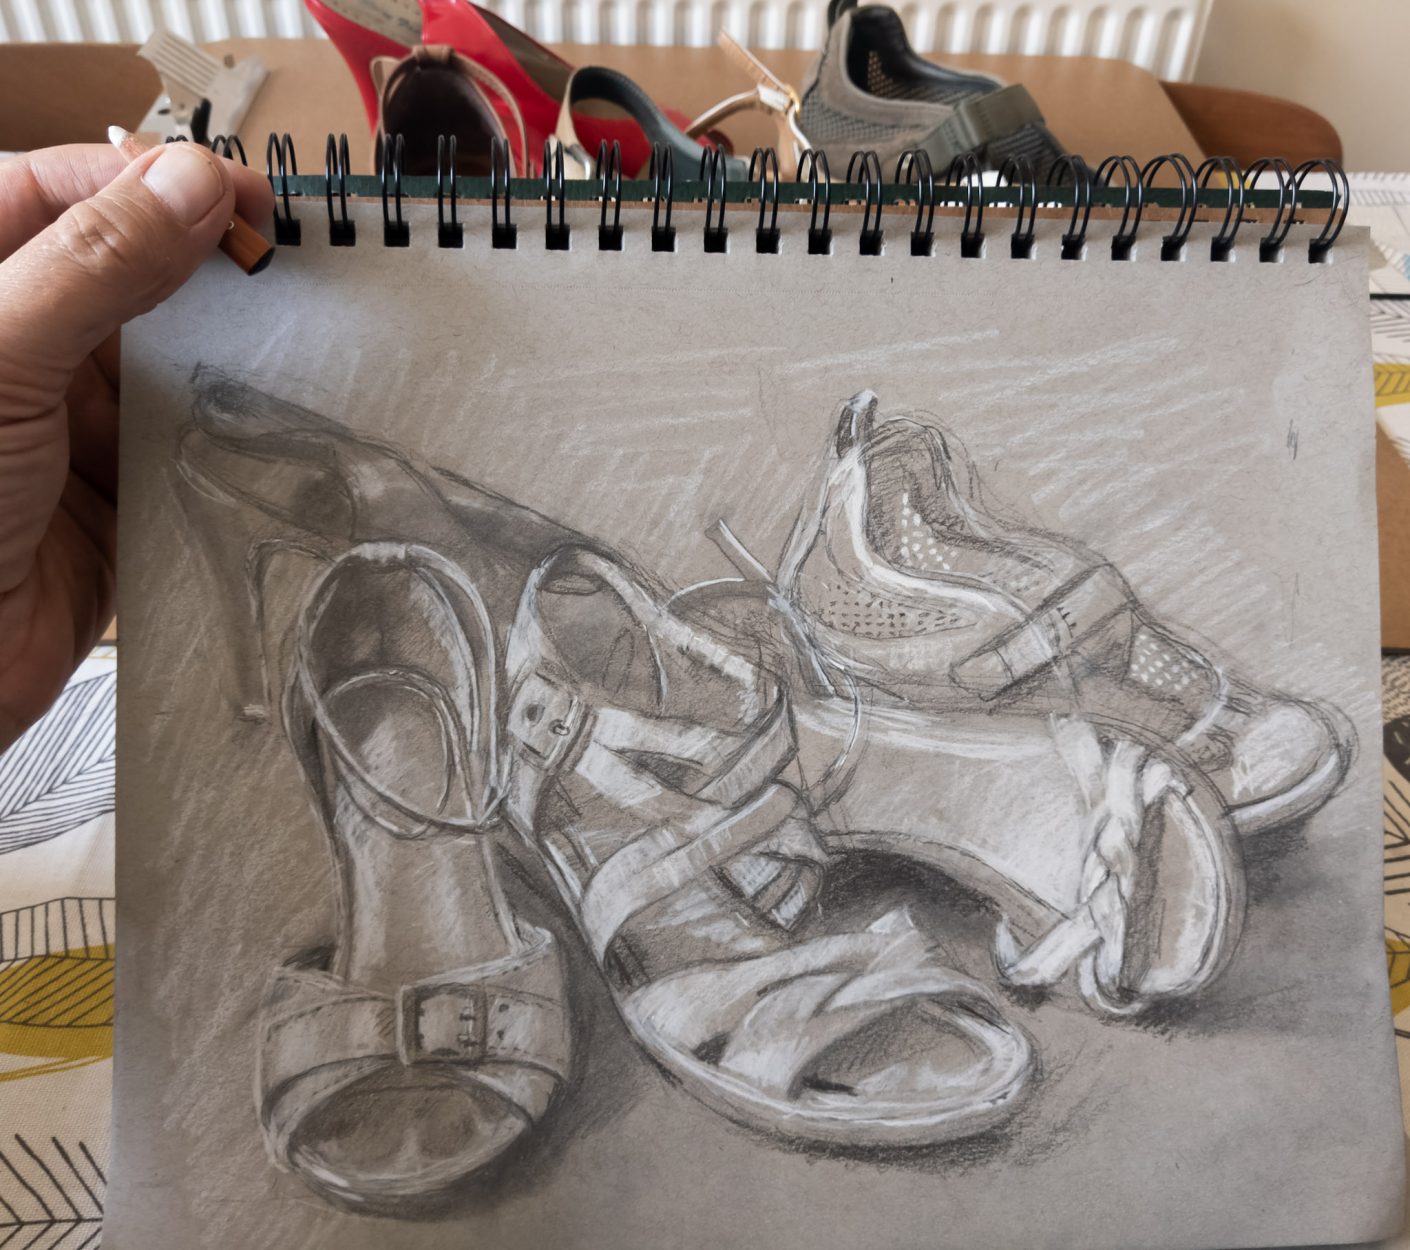 drawing of fashionable shoes during lockdown. a reminder that there was nowhere to go and wear such shoes during lockdown